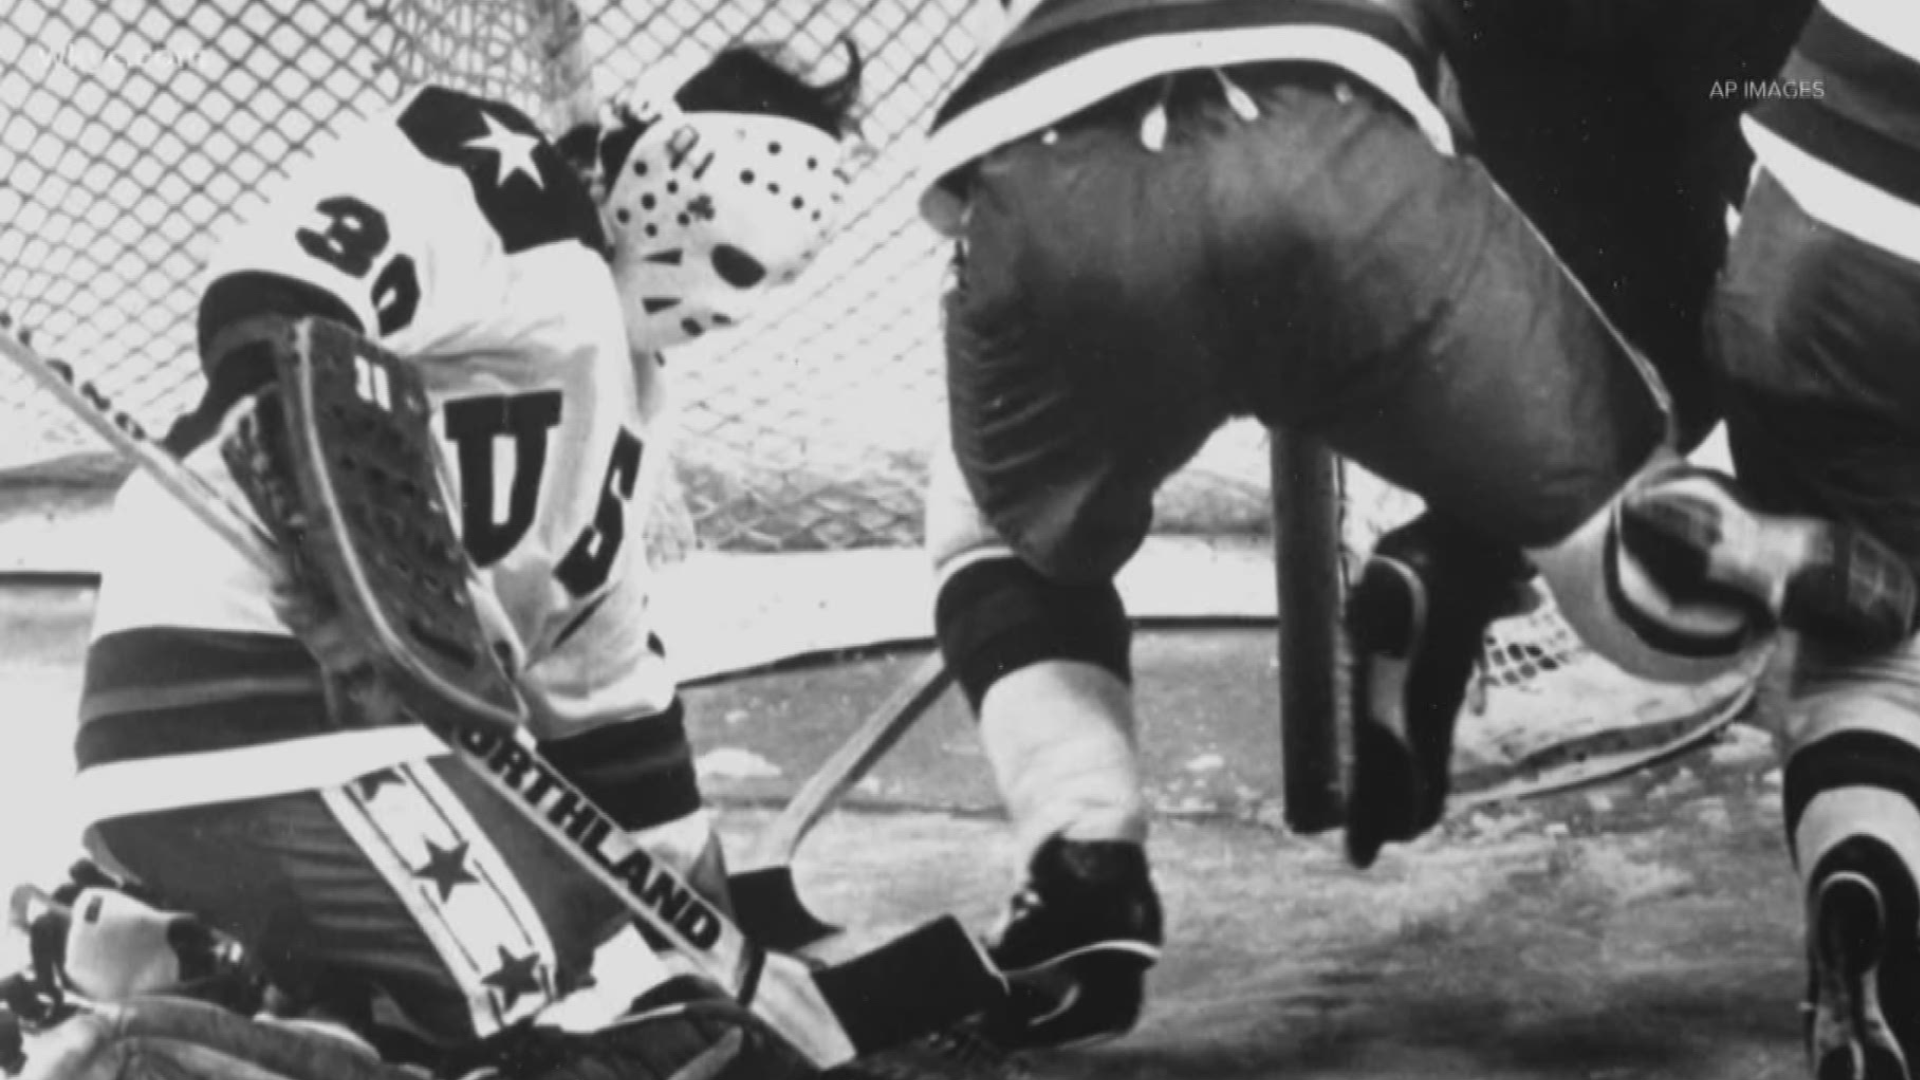 Saturday marks the 40th anniversary of the U.S. Olympic hockey team's upset of the Soviet Union. Jim Donovan reflects on that great sports moment.